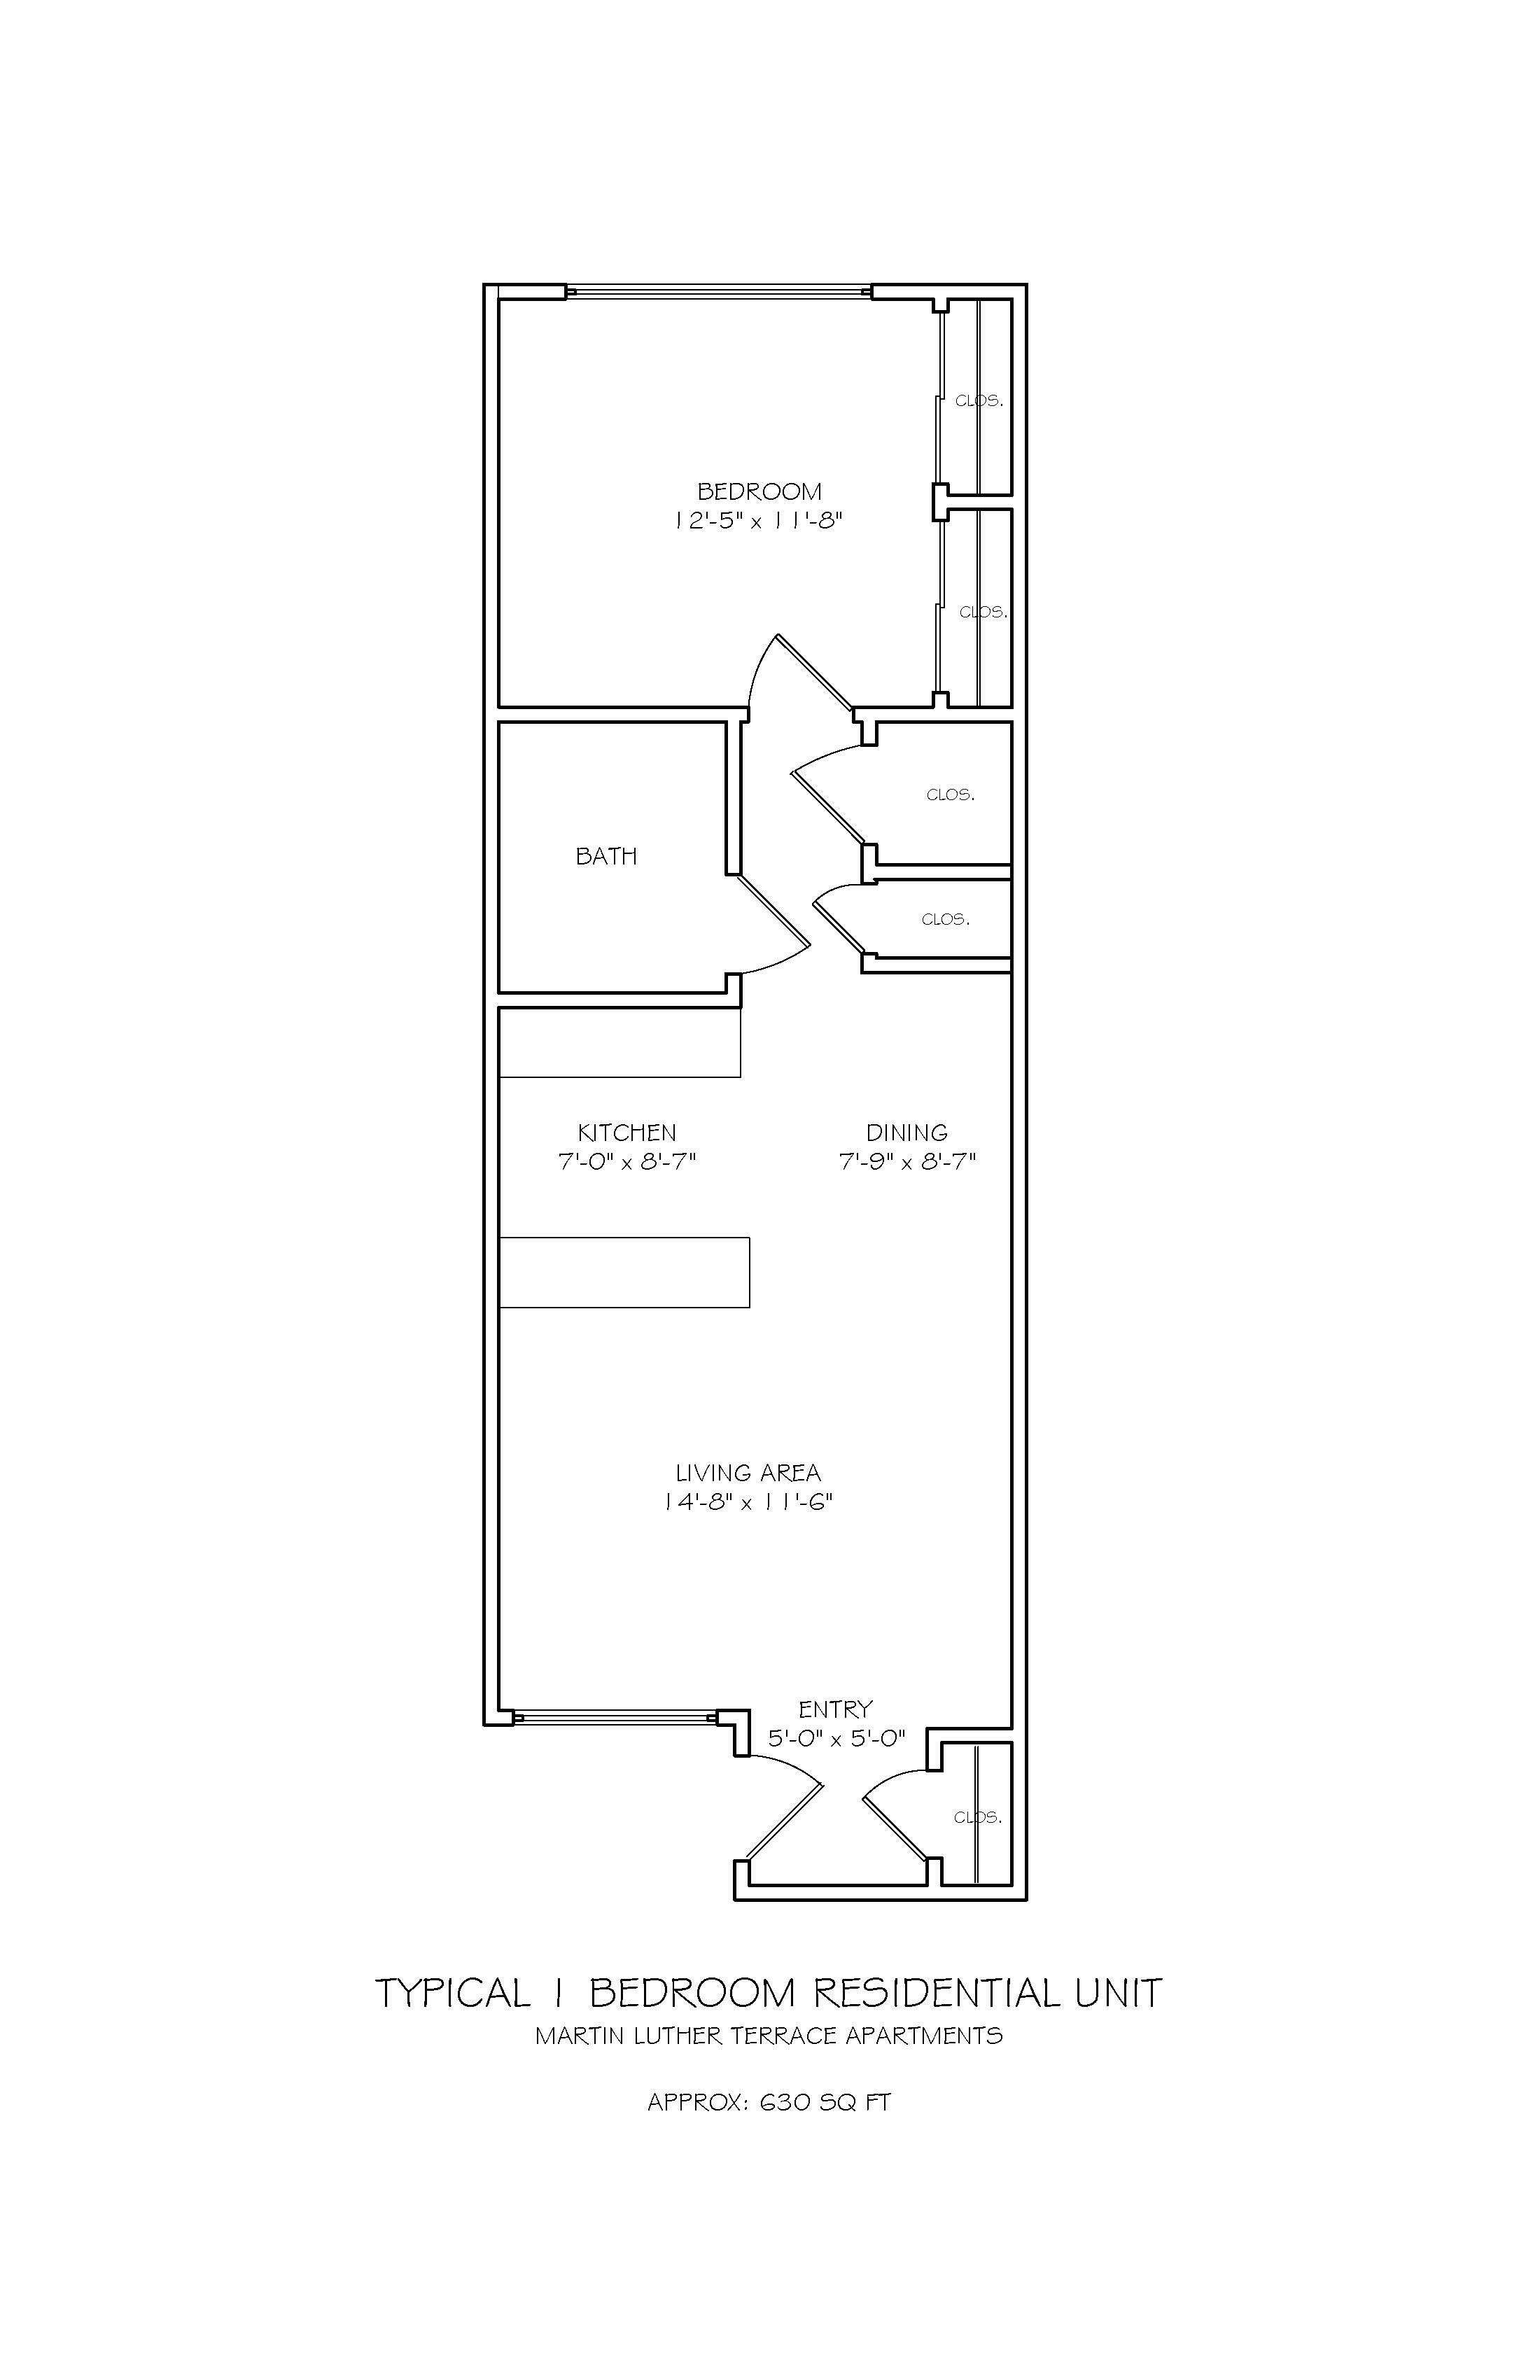 Click to View Enlarged Floor Plan